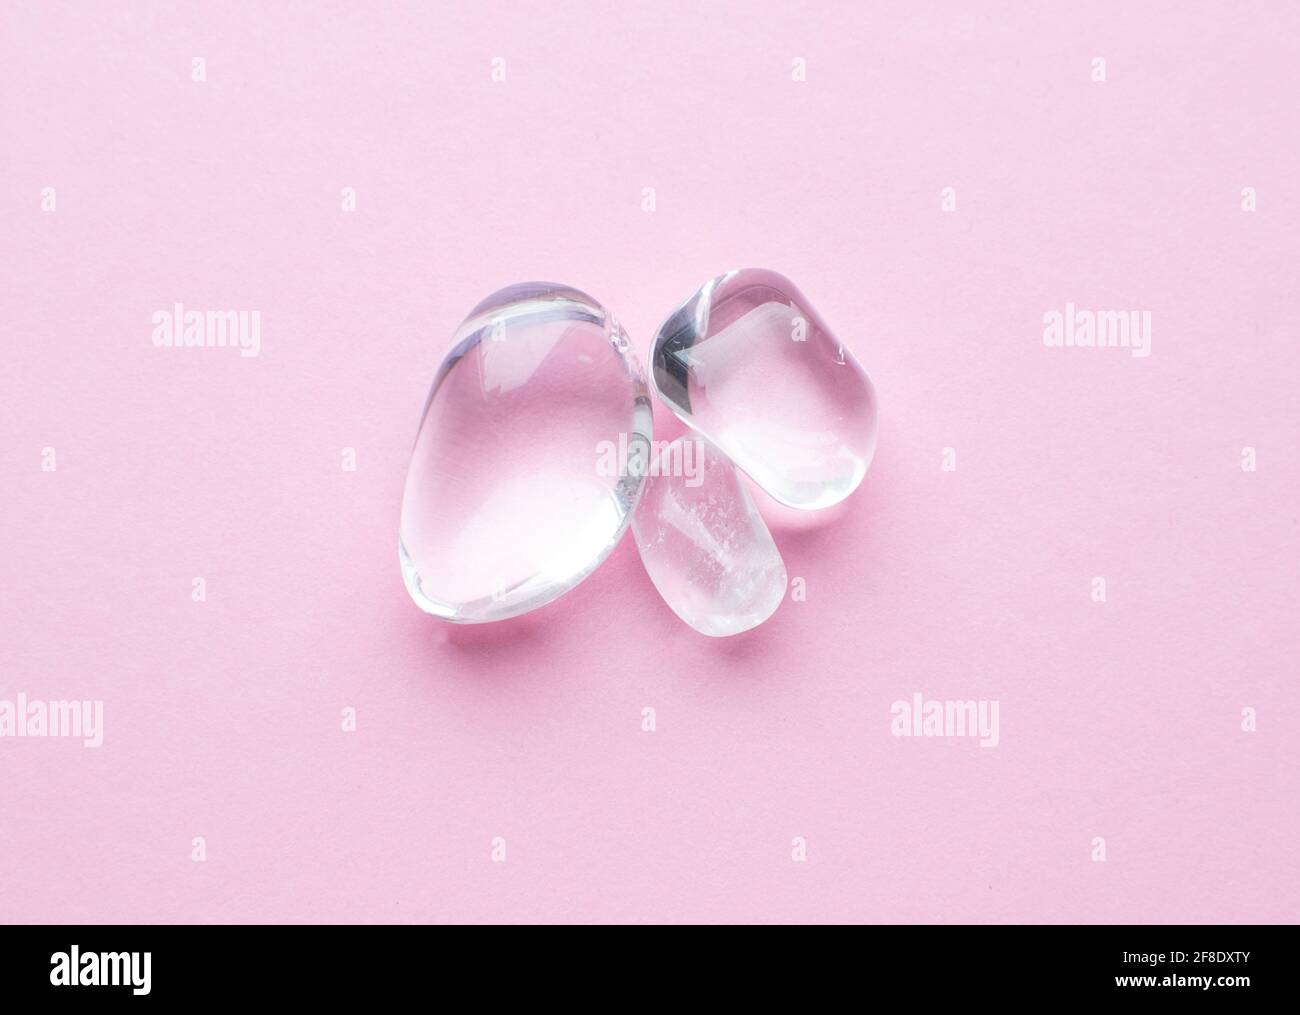 Beautiful round cut rhinestone stones on a pink background. Natural minerals for meditation. Stock Photo